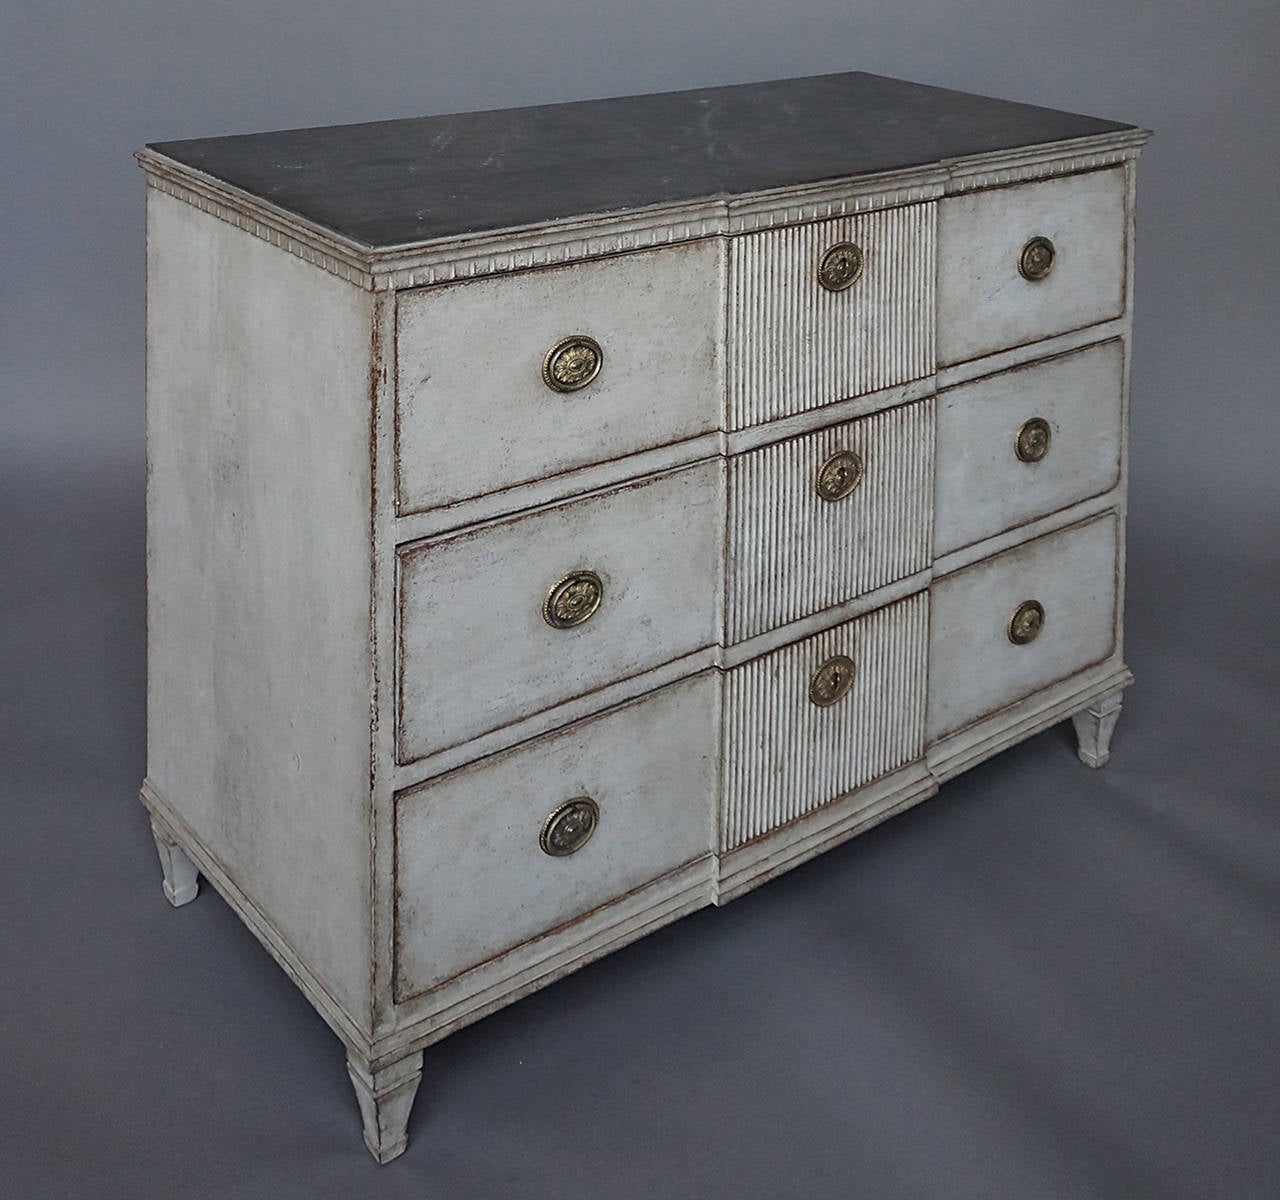 Neoclassical chest of drawers, Sweden circa 1840, with dentil molding under the shaped top and a central panel of reeding on the drawer fronts.